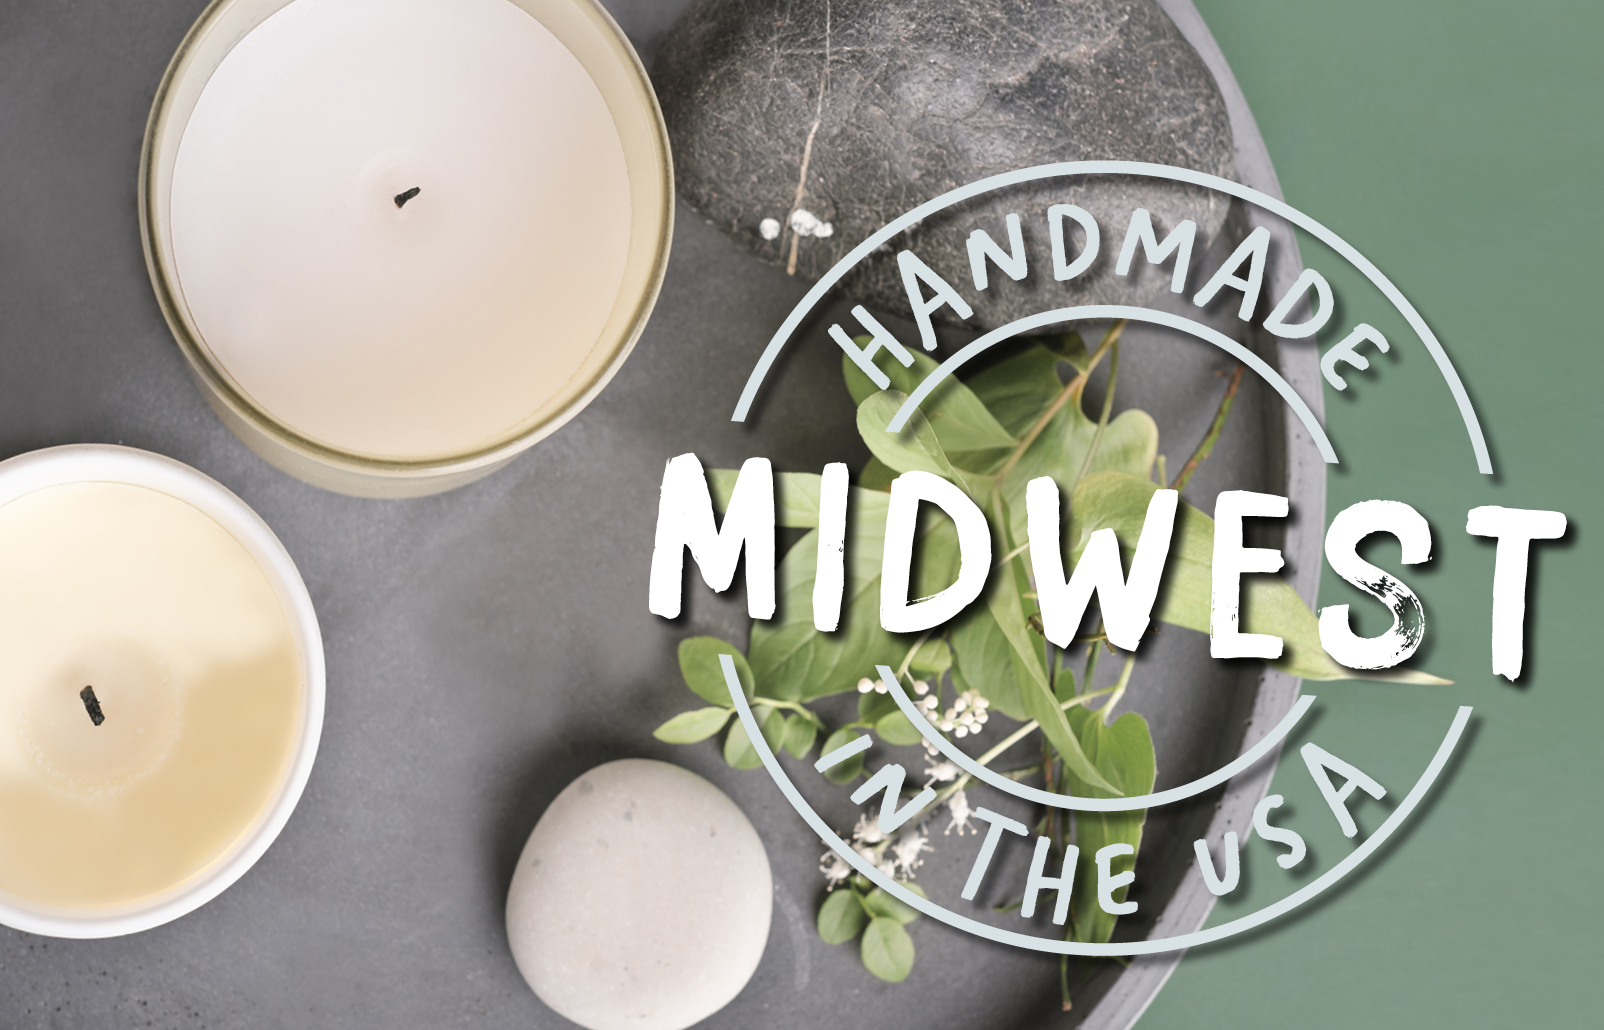 Shop Local: Handmade in the Midwest